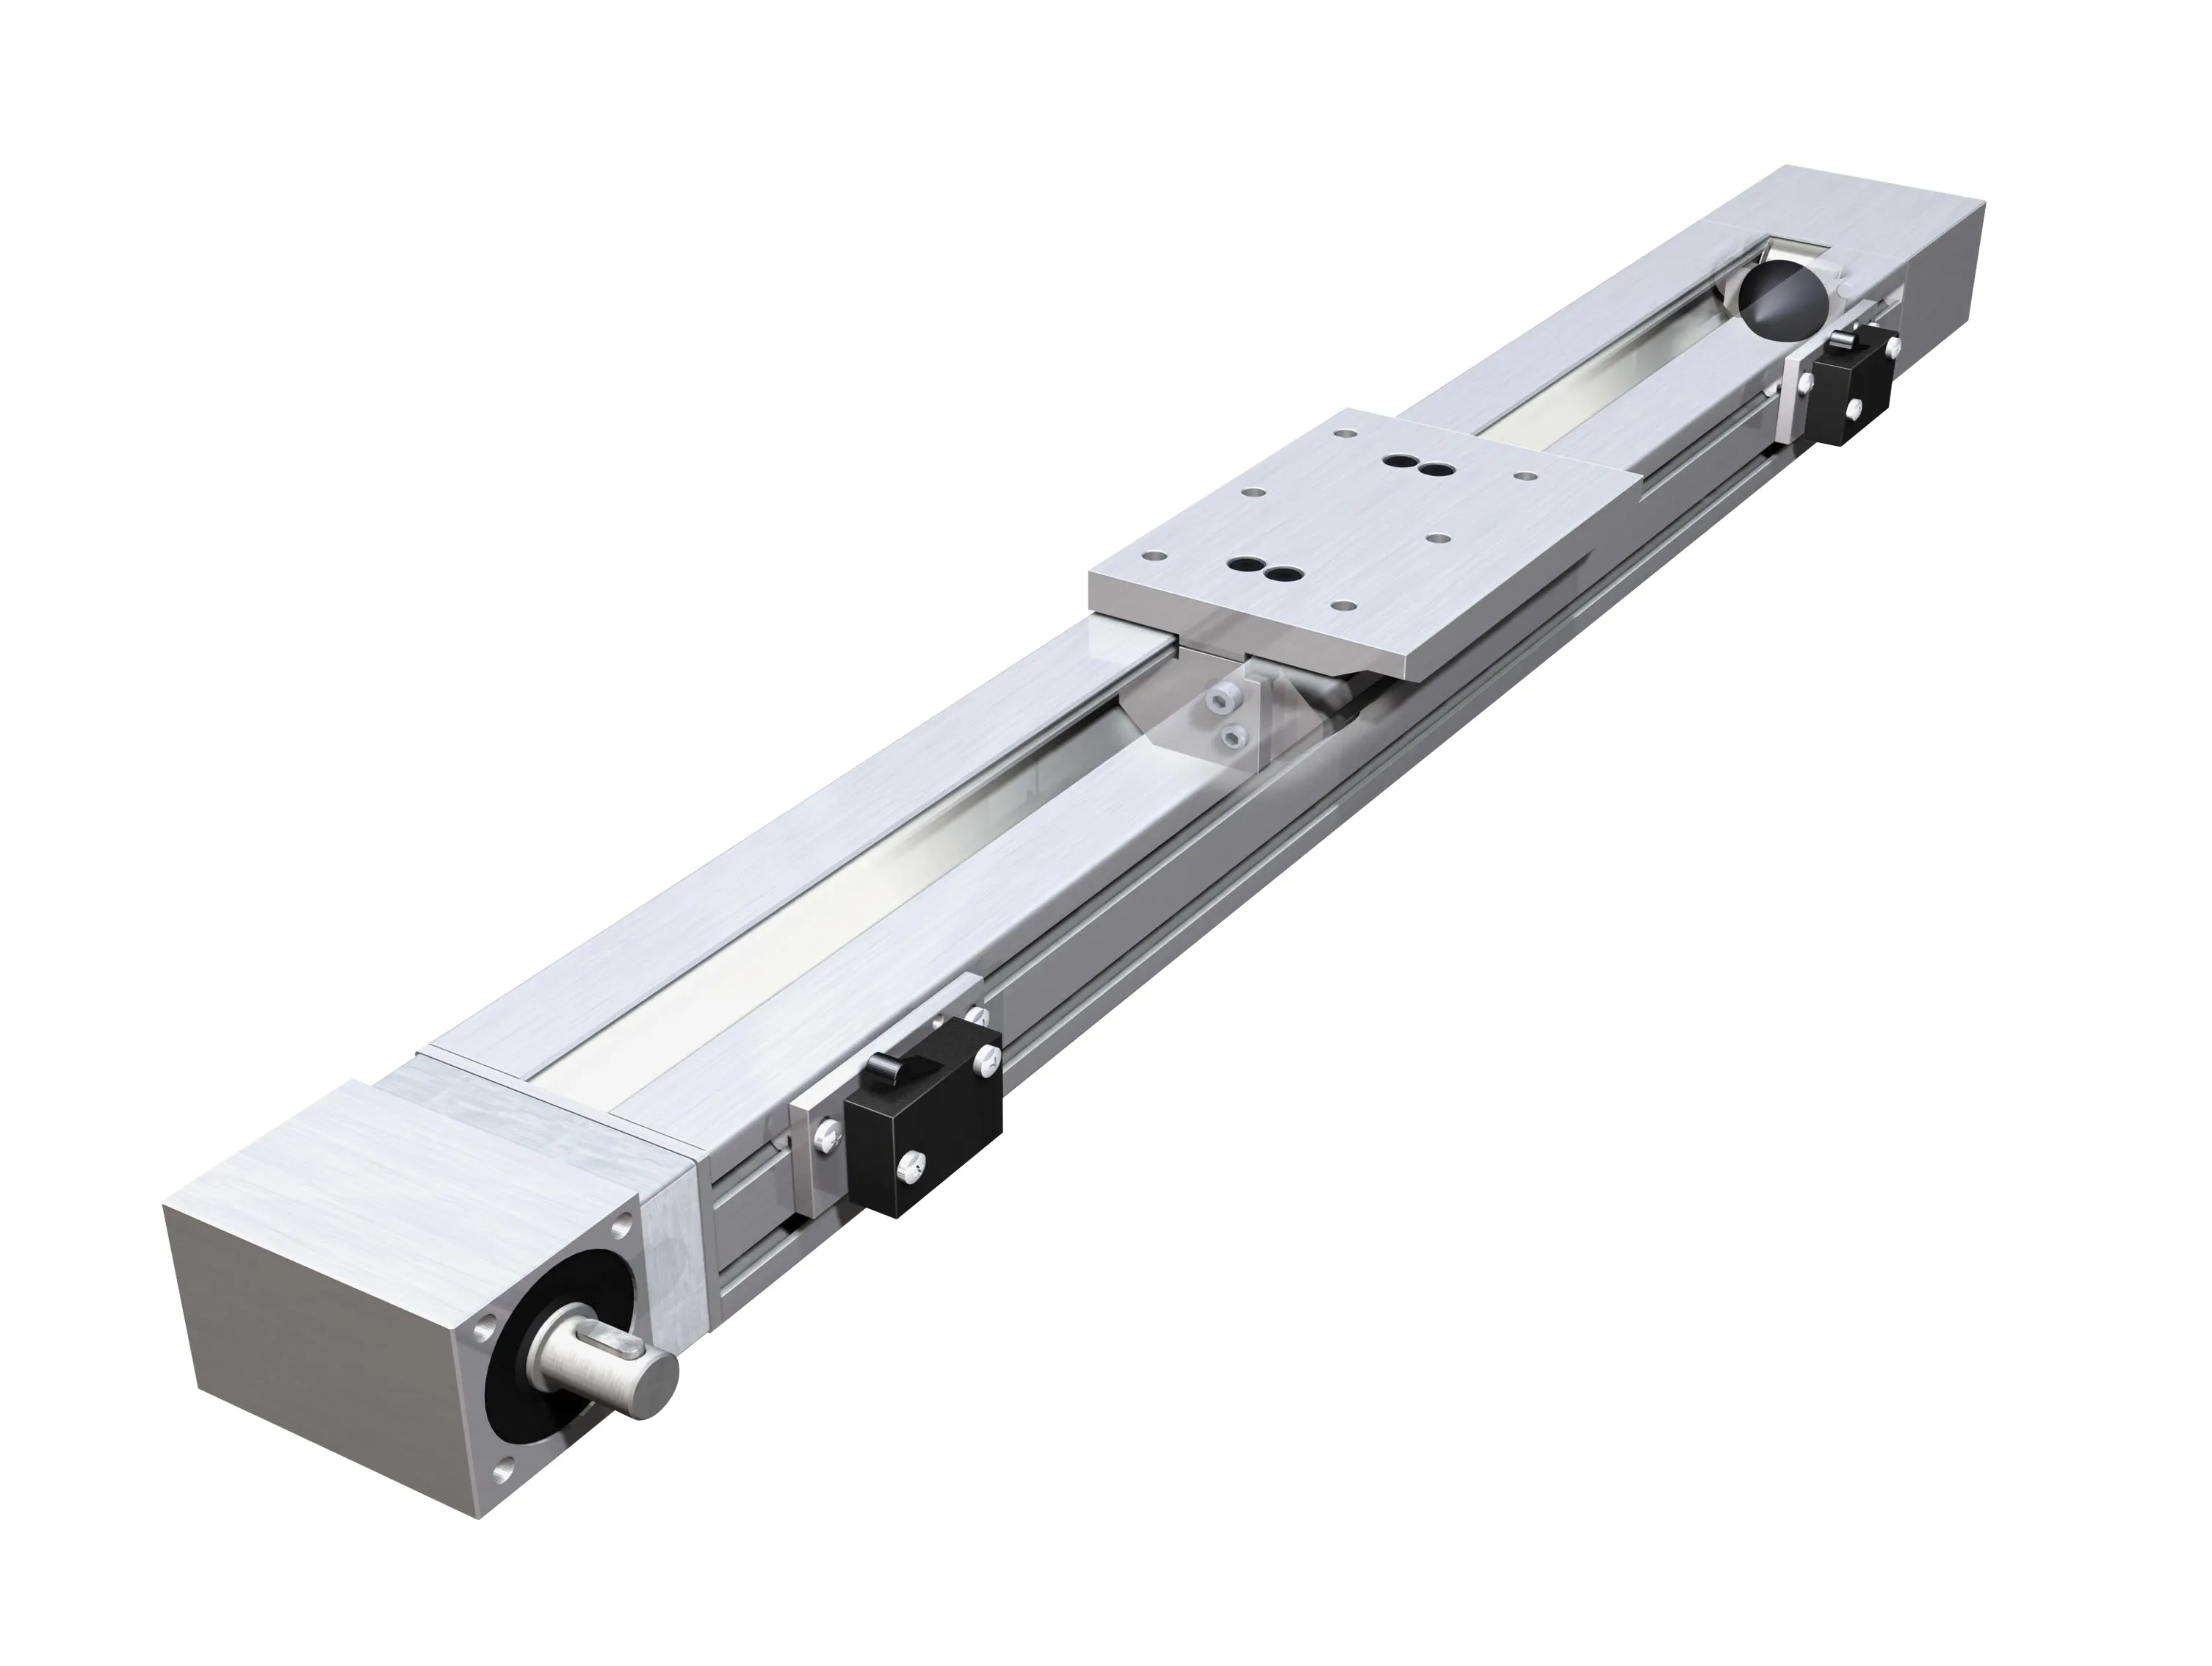 INA LINEAR TECHNICS Linear Motion Guide Rail 20mm wide 18mm tall 700mm long NEW! 